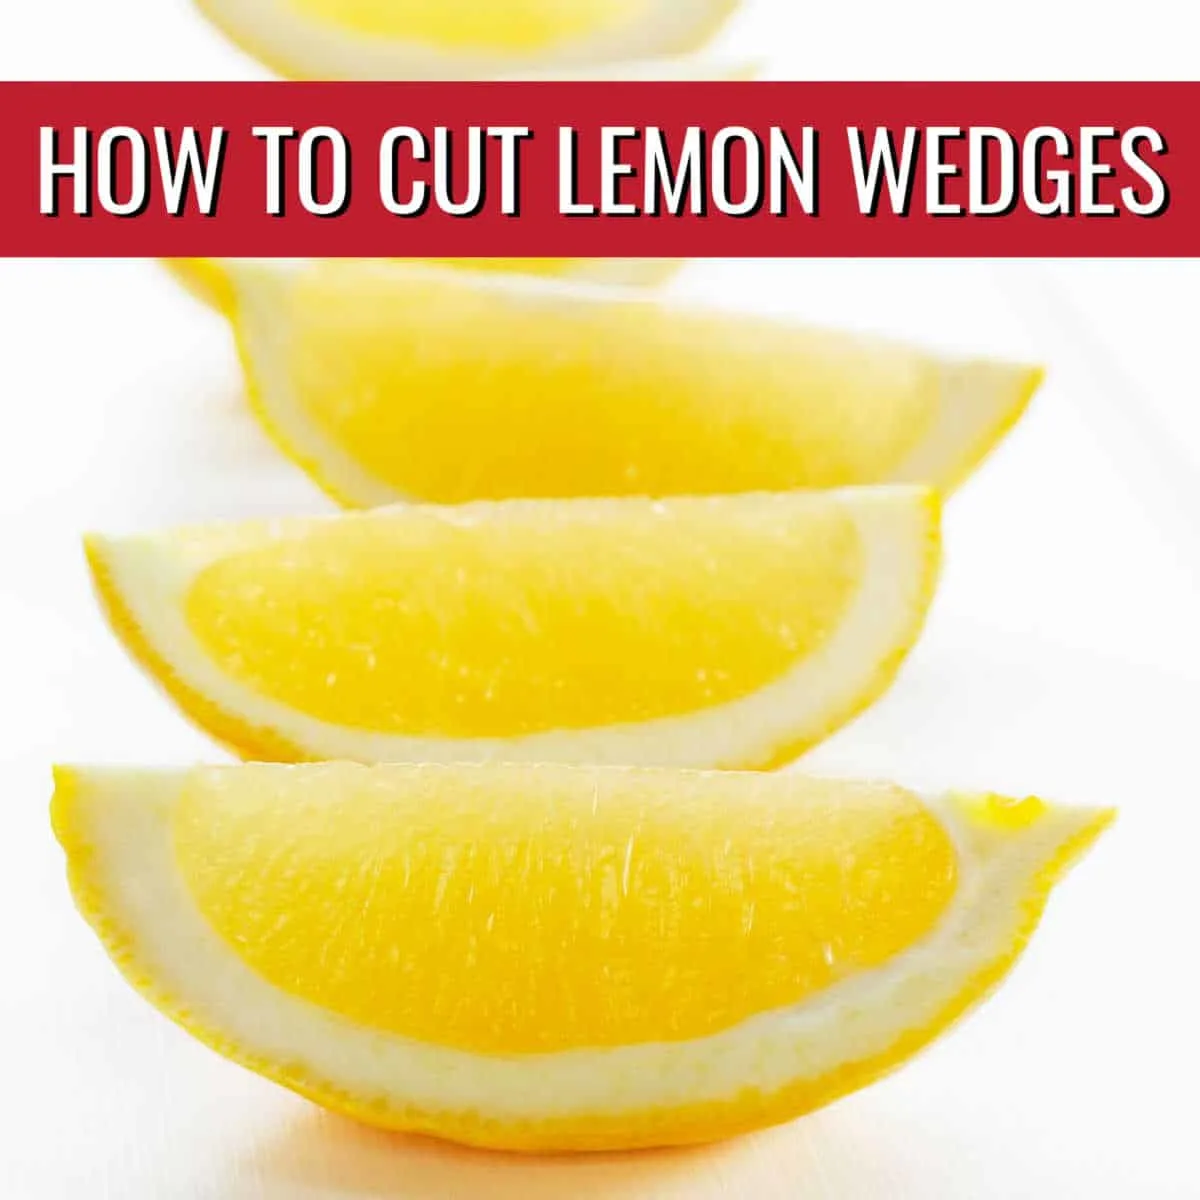 lemon wedges with red banner and text